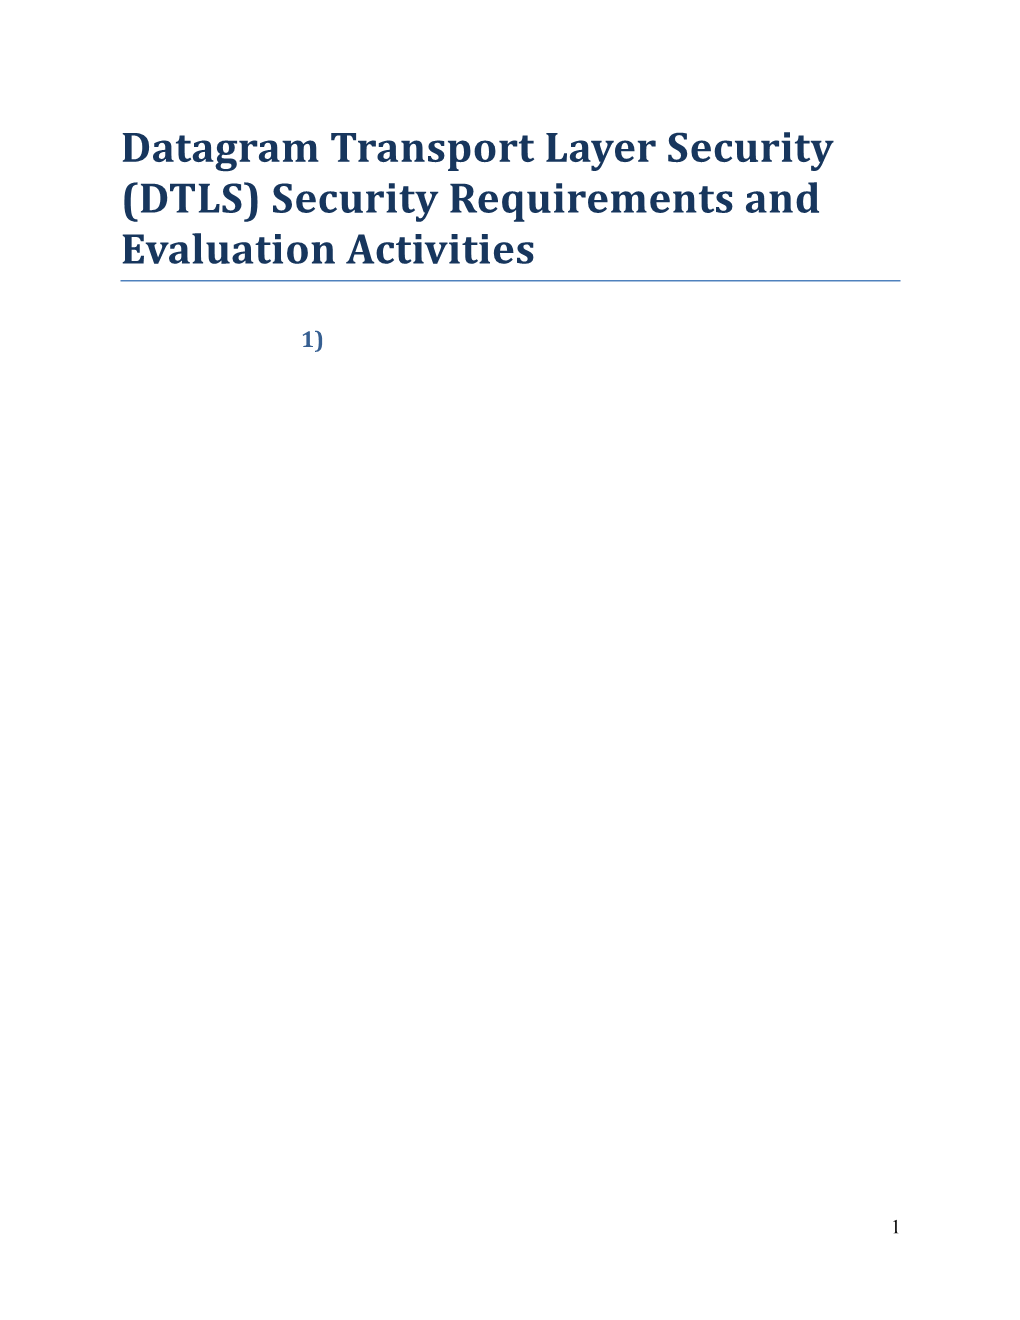 Datagram Transport Layer Security (DTLS) Security Requirements and Evaluation Activities